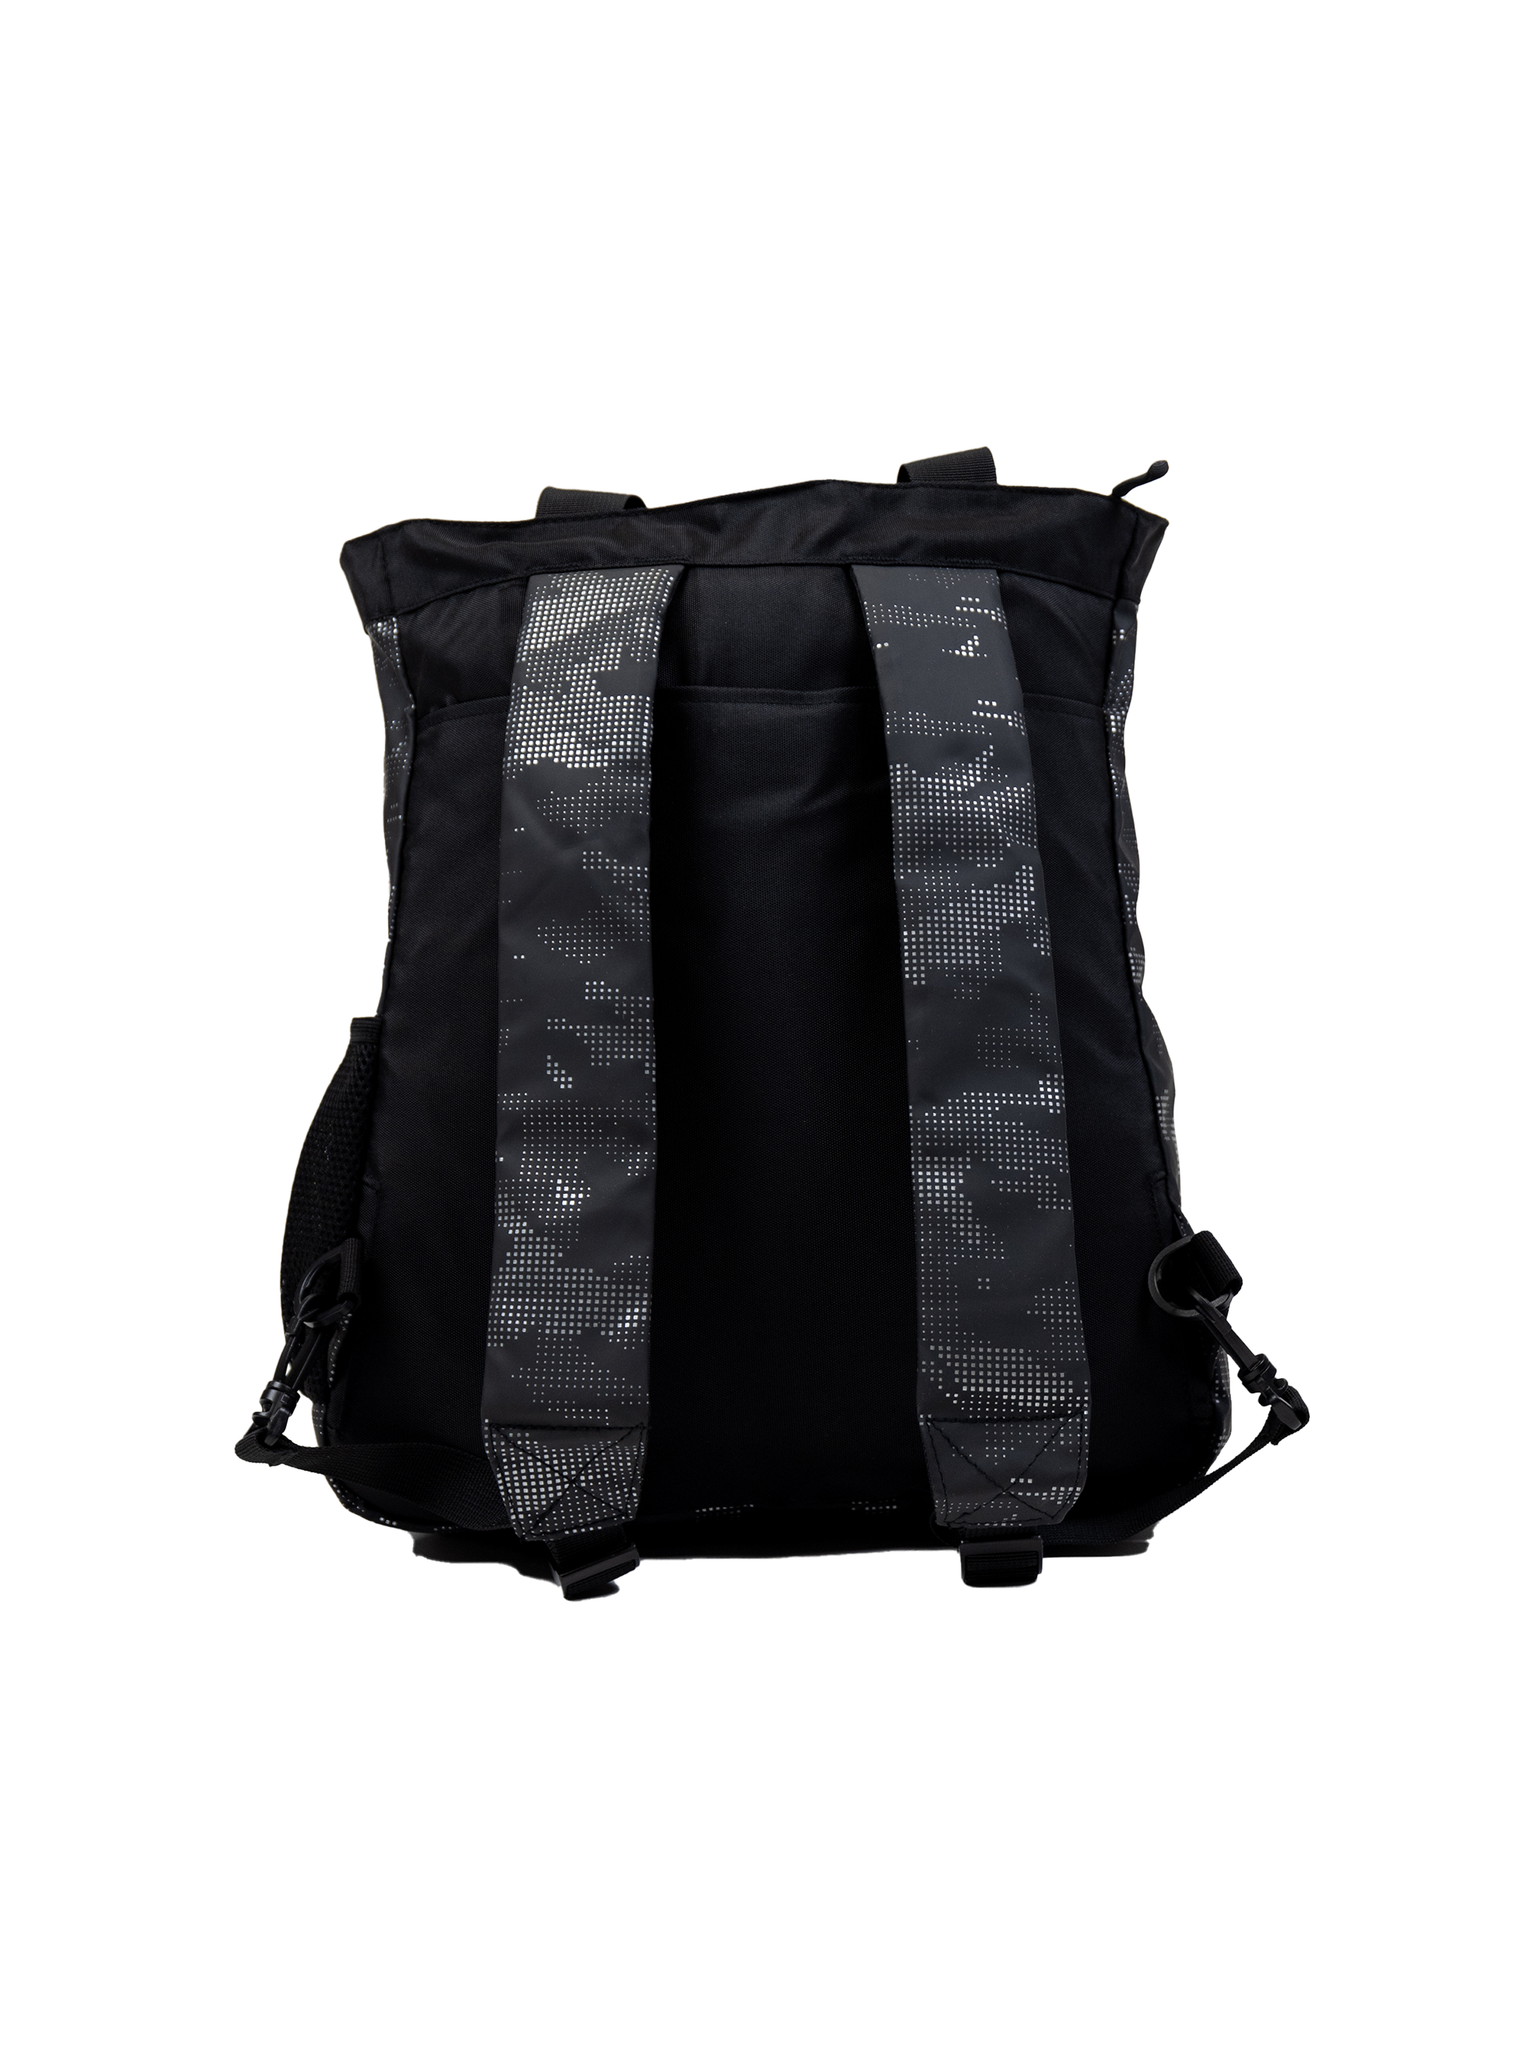 Takedown Backpack - Black Carbon Camo